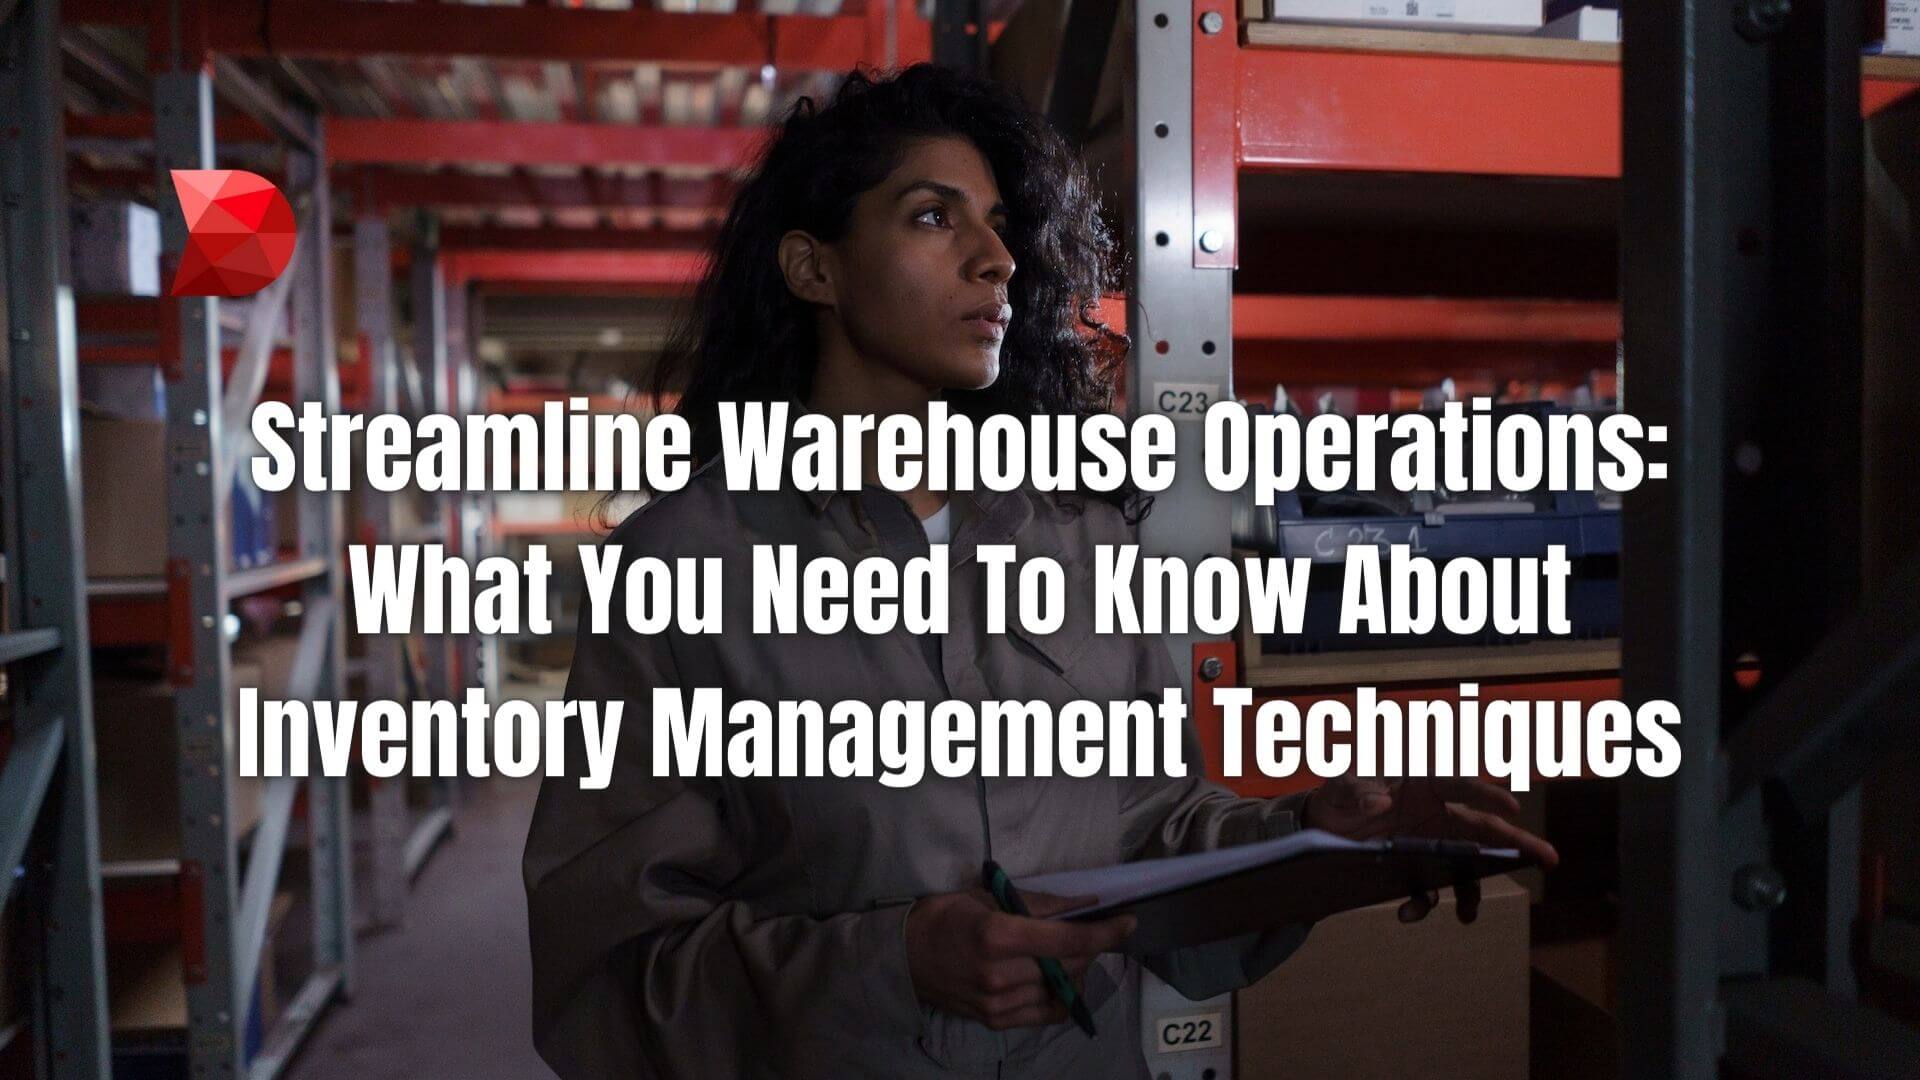 Utilizing appropriate tools and techniques for inventory management can provide numerous advantages for your business. Learn more!